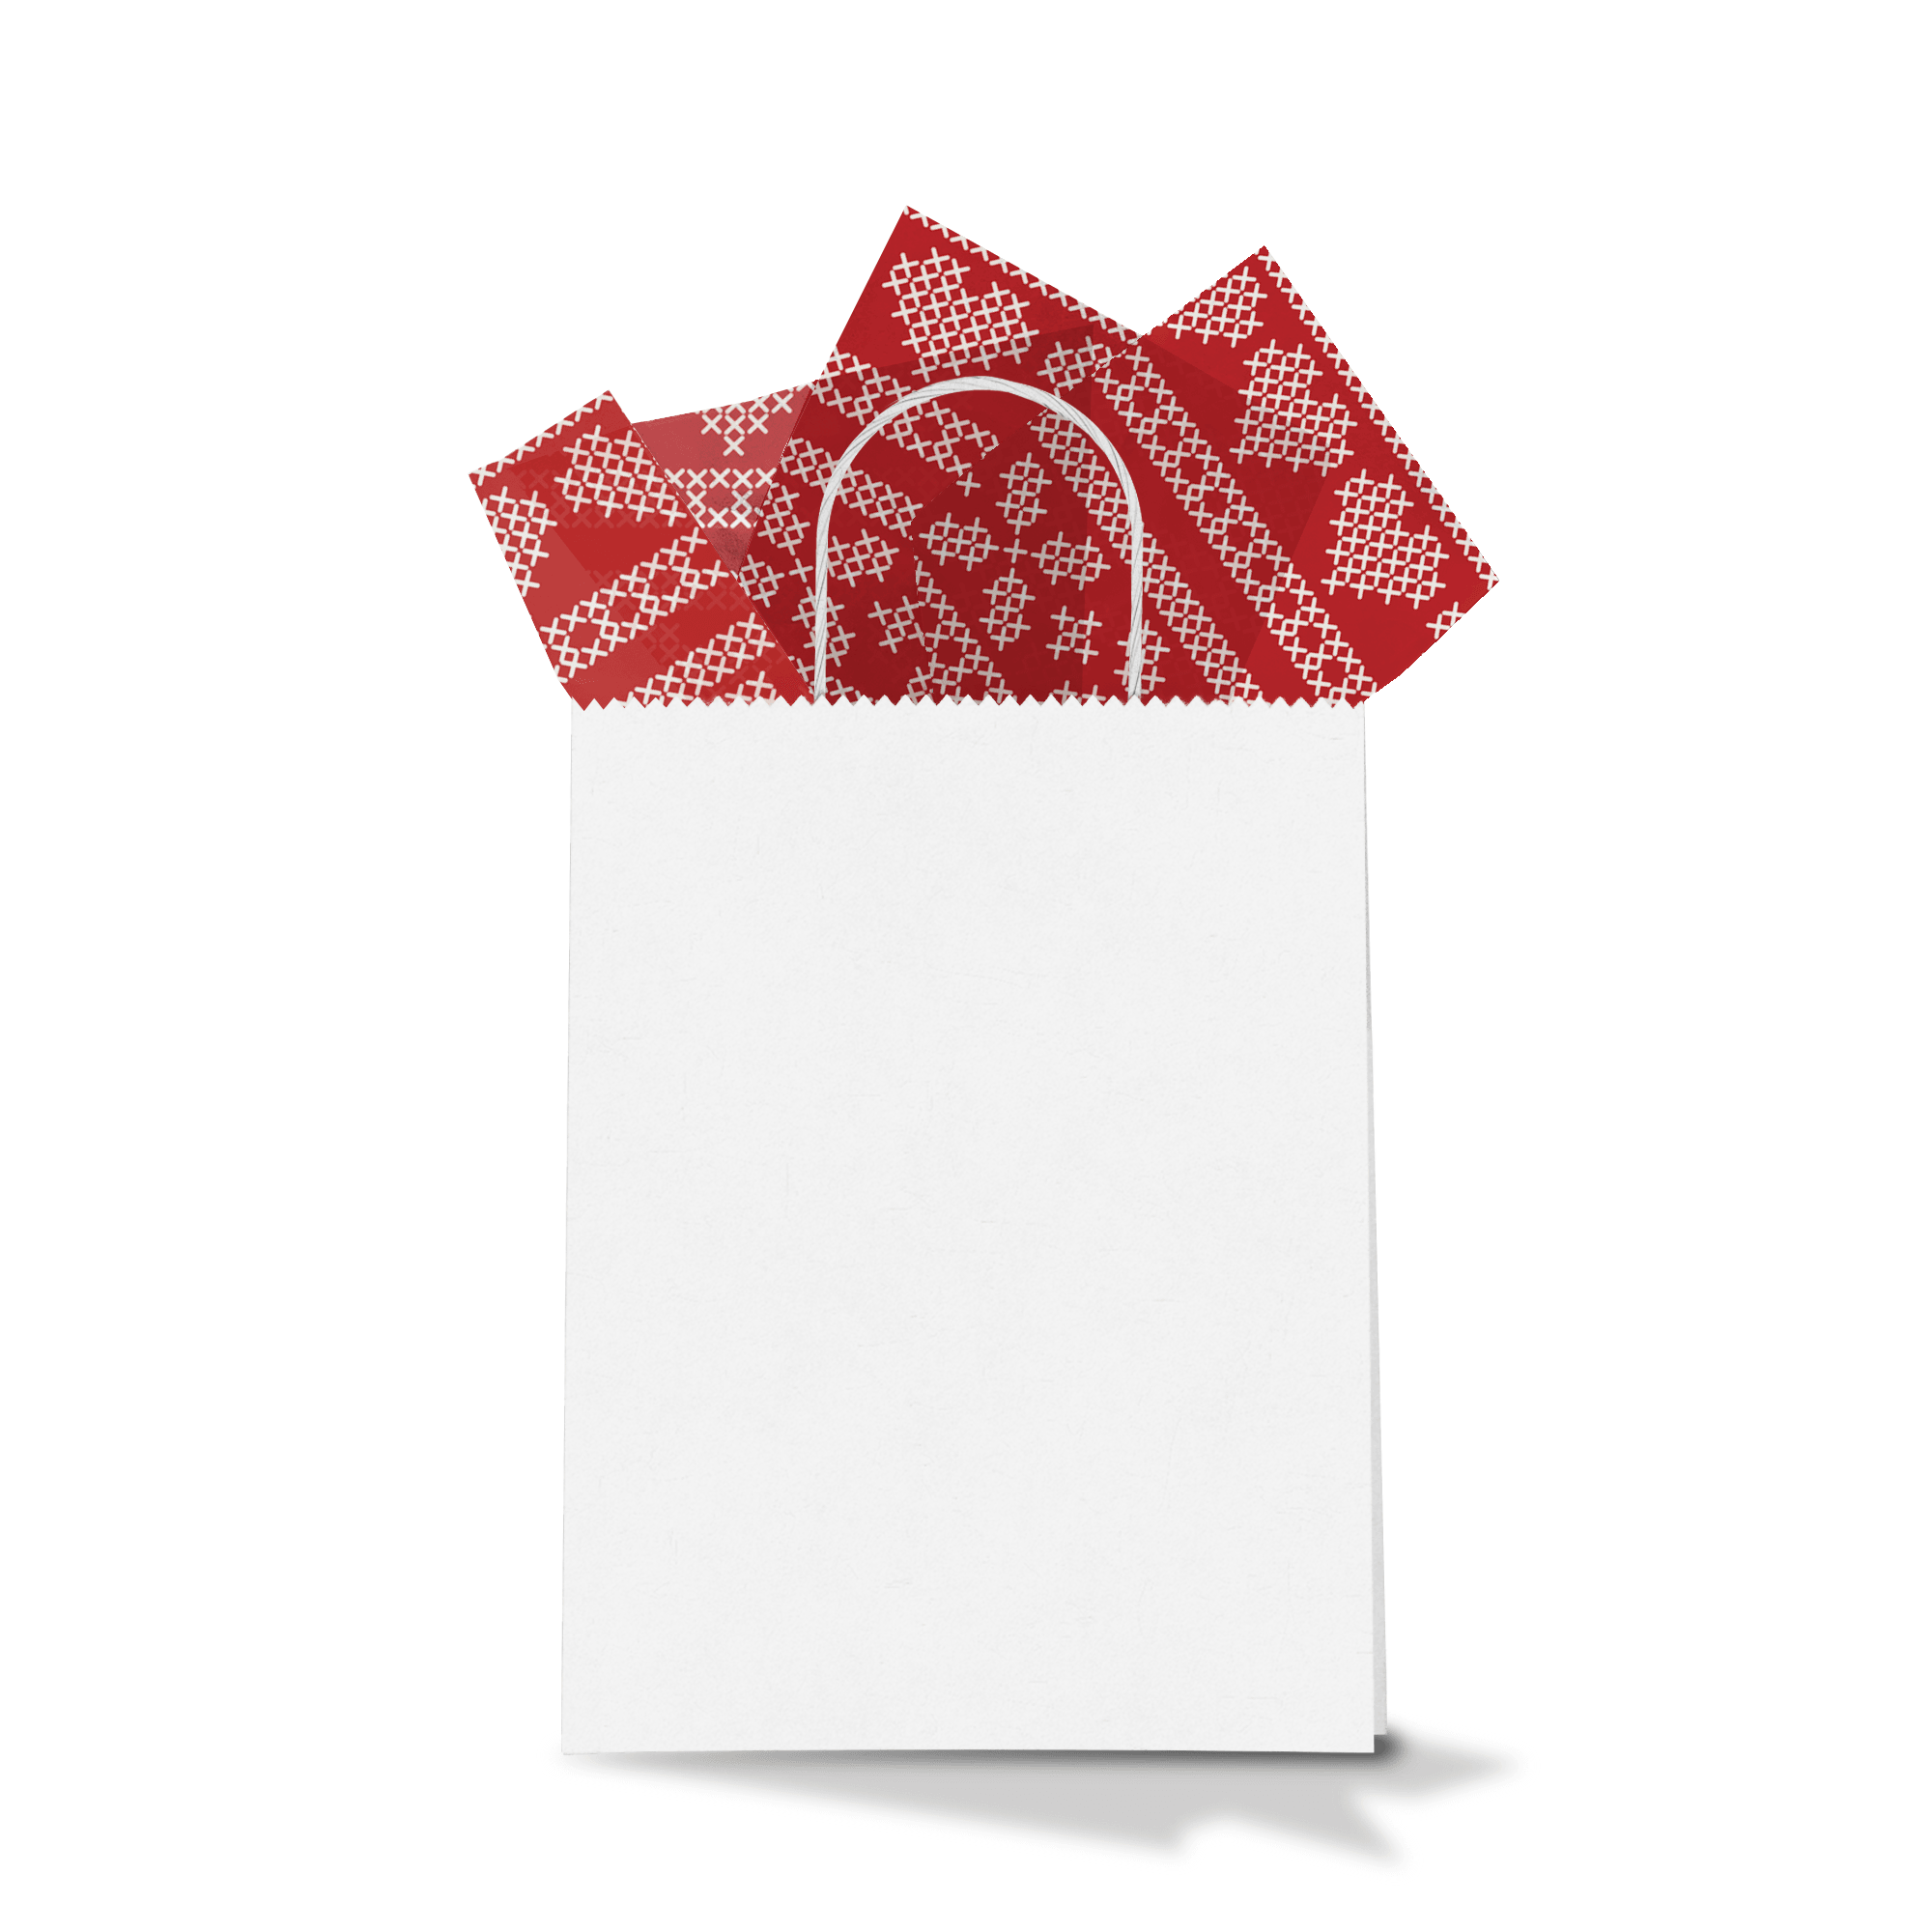 Ugly Sweater Print Tissue Paper - Christmas Tissue Paper for Gift Wrapping  - Tissue for Gift Bags - Red Christmas Tissue - Decorative Tissue for